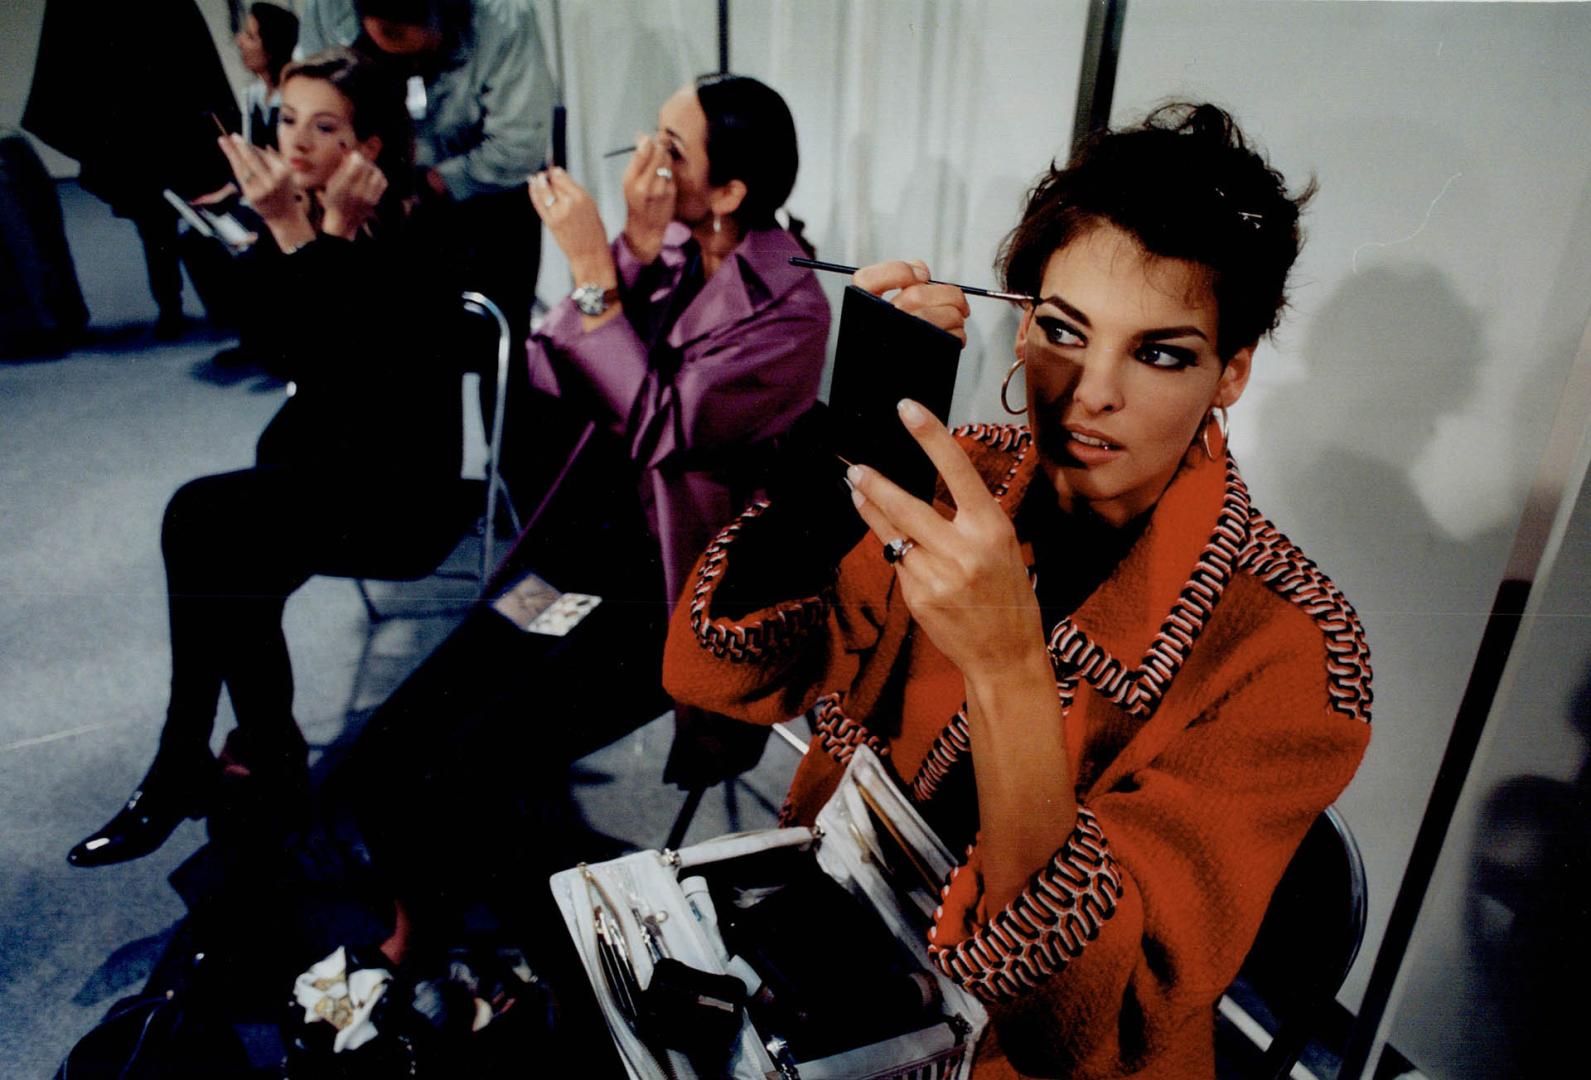 Top, the more experienced models, including Canadian born Linda Evangelista, do their own makeup